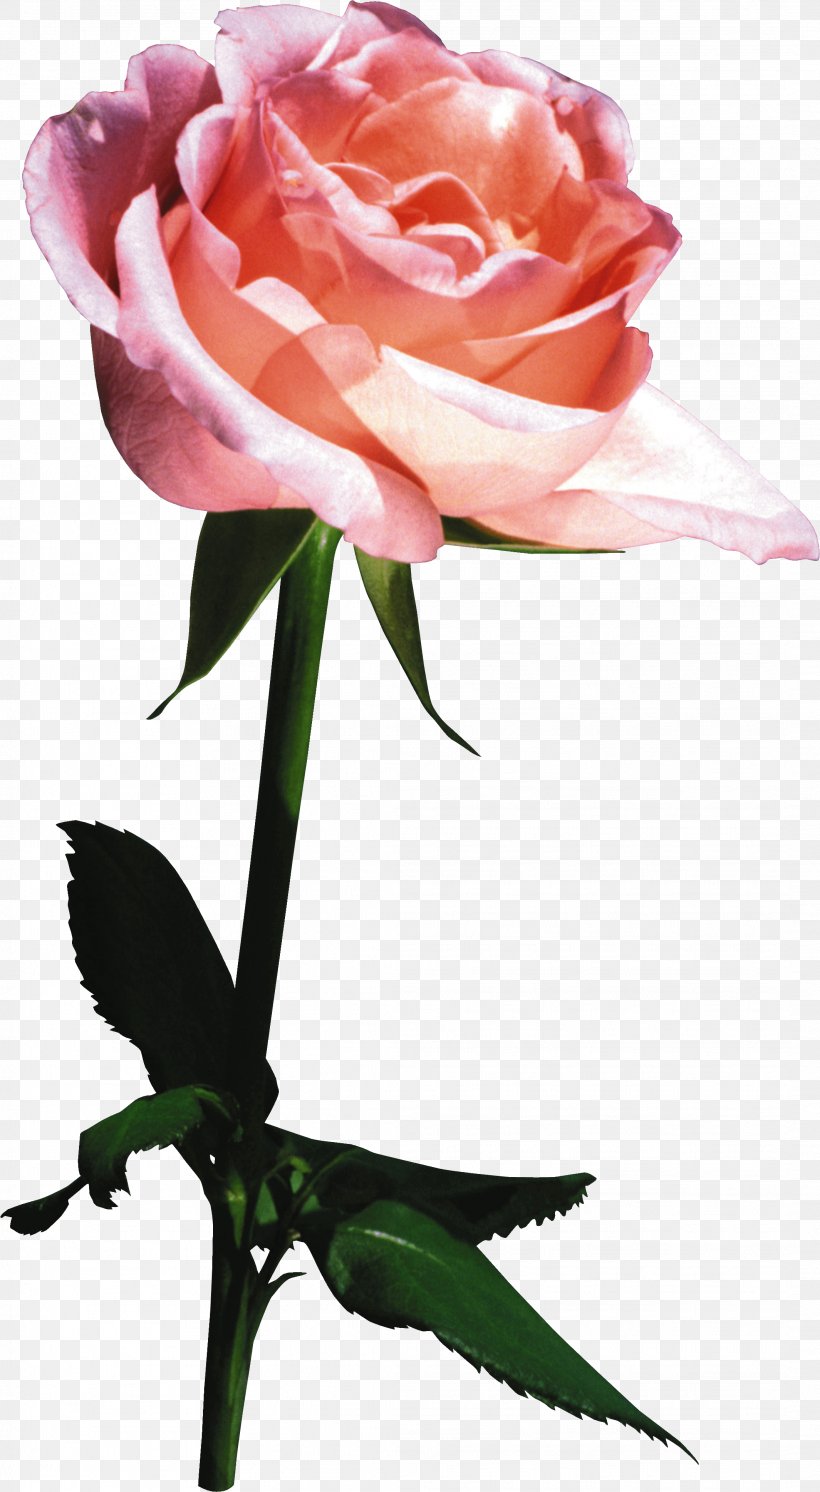 Garden Roses Cabbage Rose Cut Flowers Floral Design, PNG, 2129x3875px, Garden Roses, Bud, Cabbage Rose, Cut Flowers, Floral Design Download Free